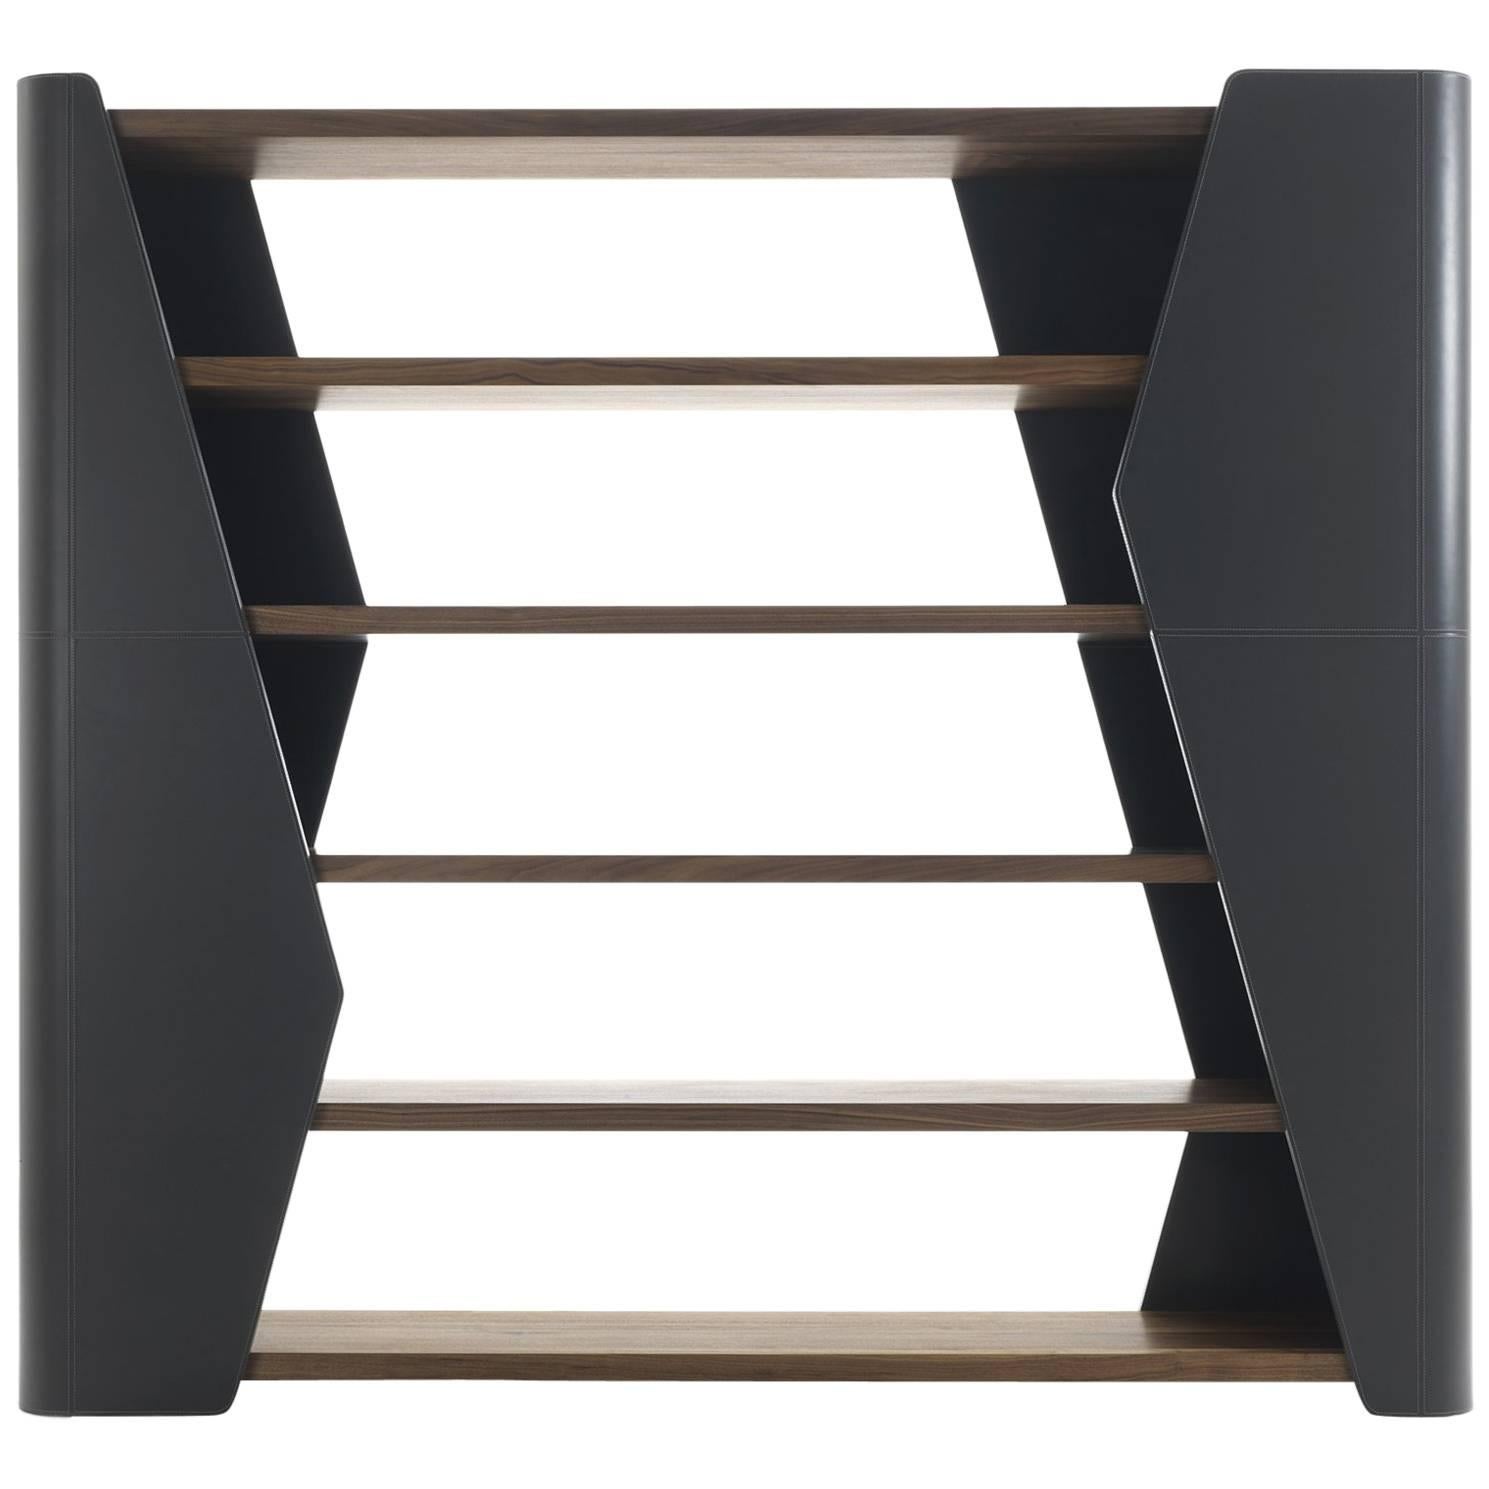 Racing Bookshelves with Solid Walnut Wood and Genuine Leather